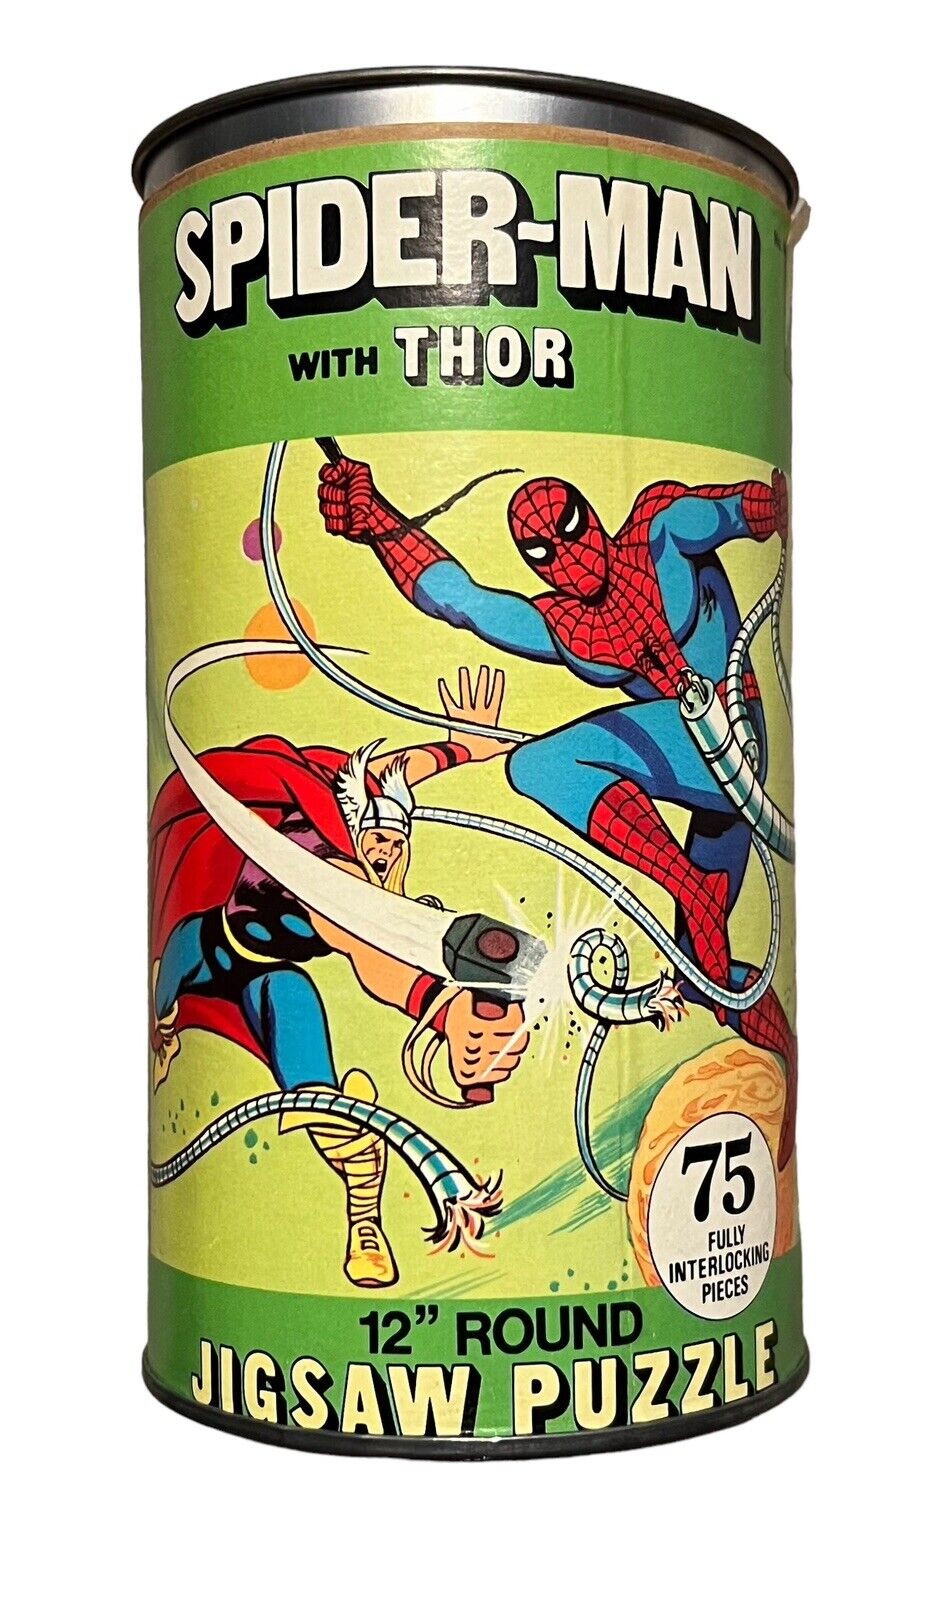 Vintage Spiderman with Thor 12” Round Jigsaw Puzzle Tin HG Toys Complete 1974